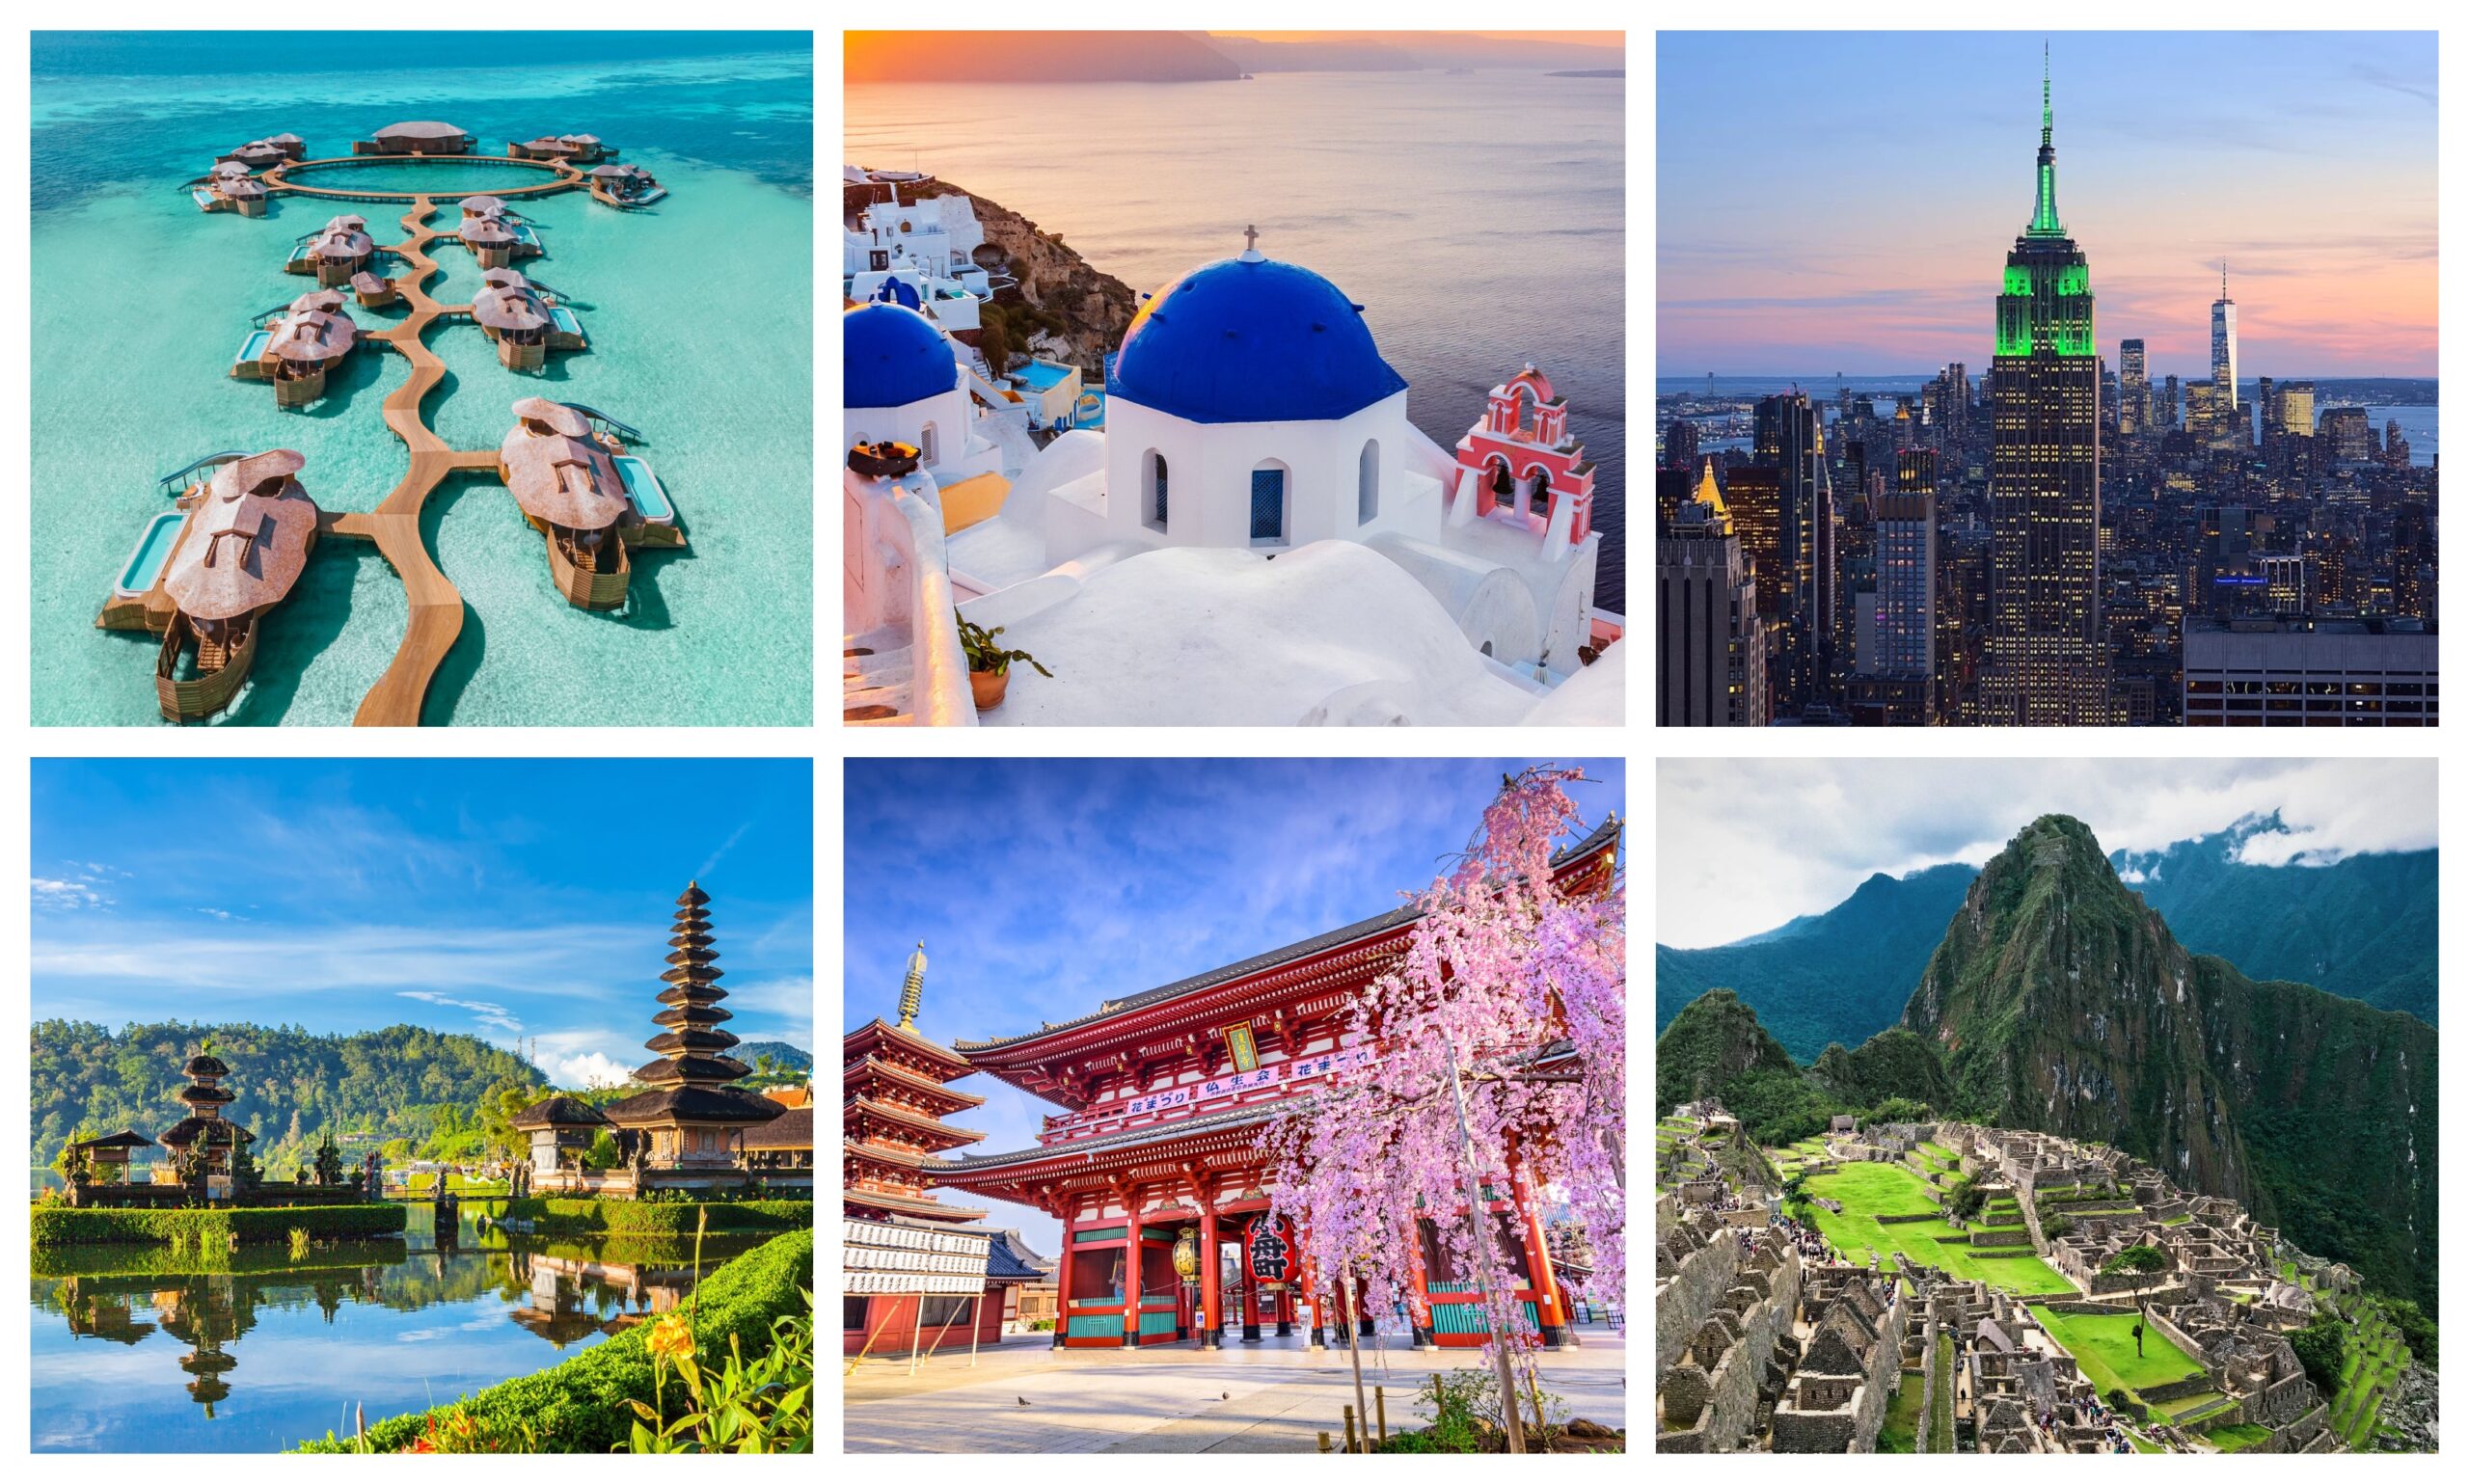 The Top 10 Most Instagrammable Travel Destinations in the World